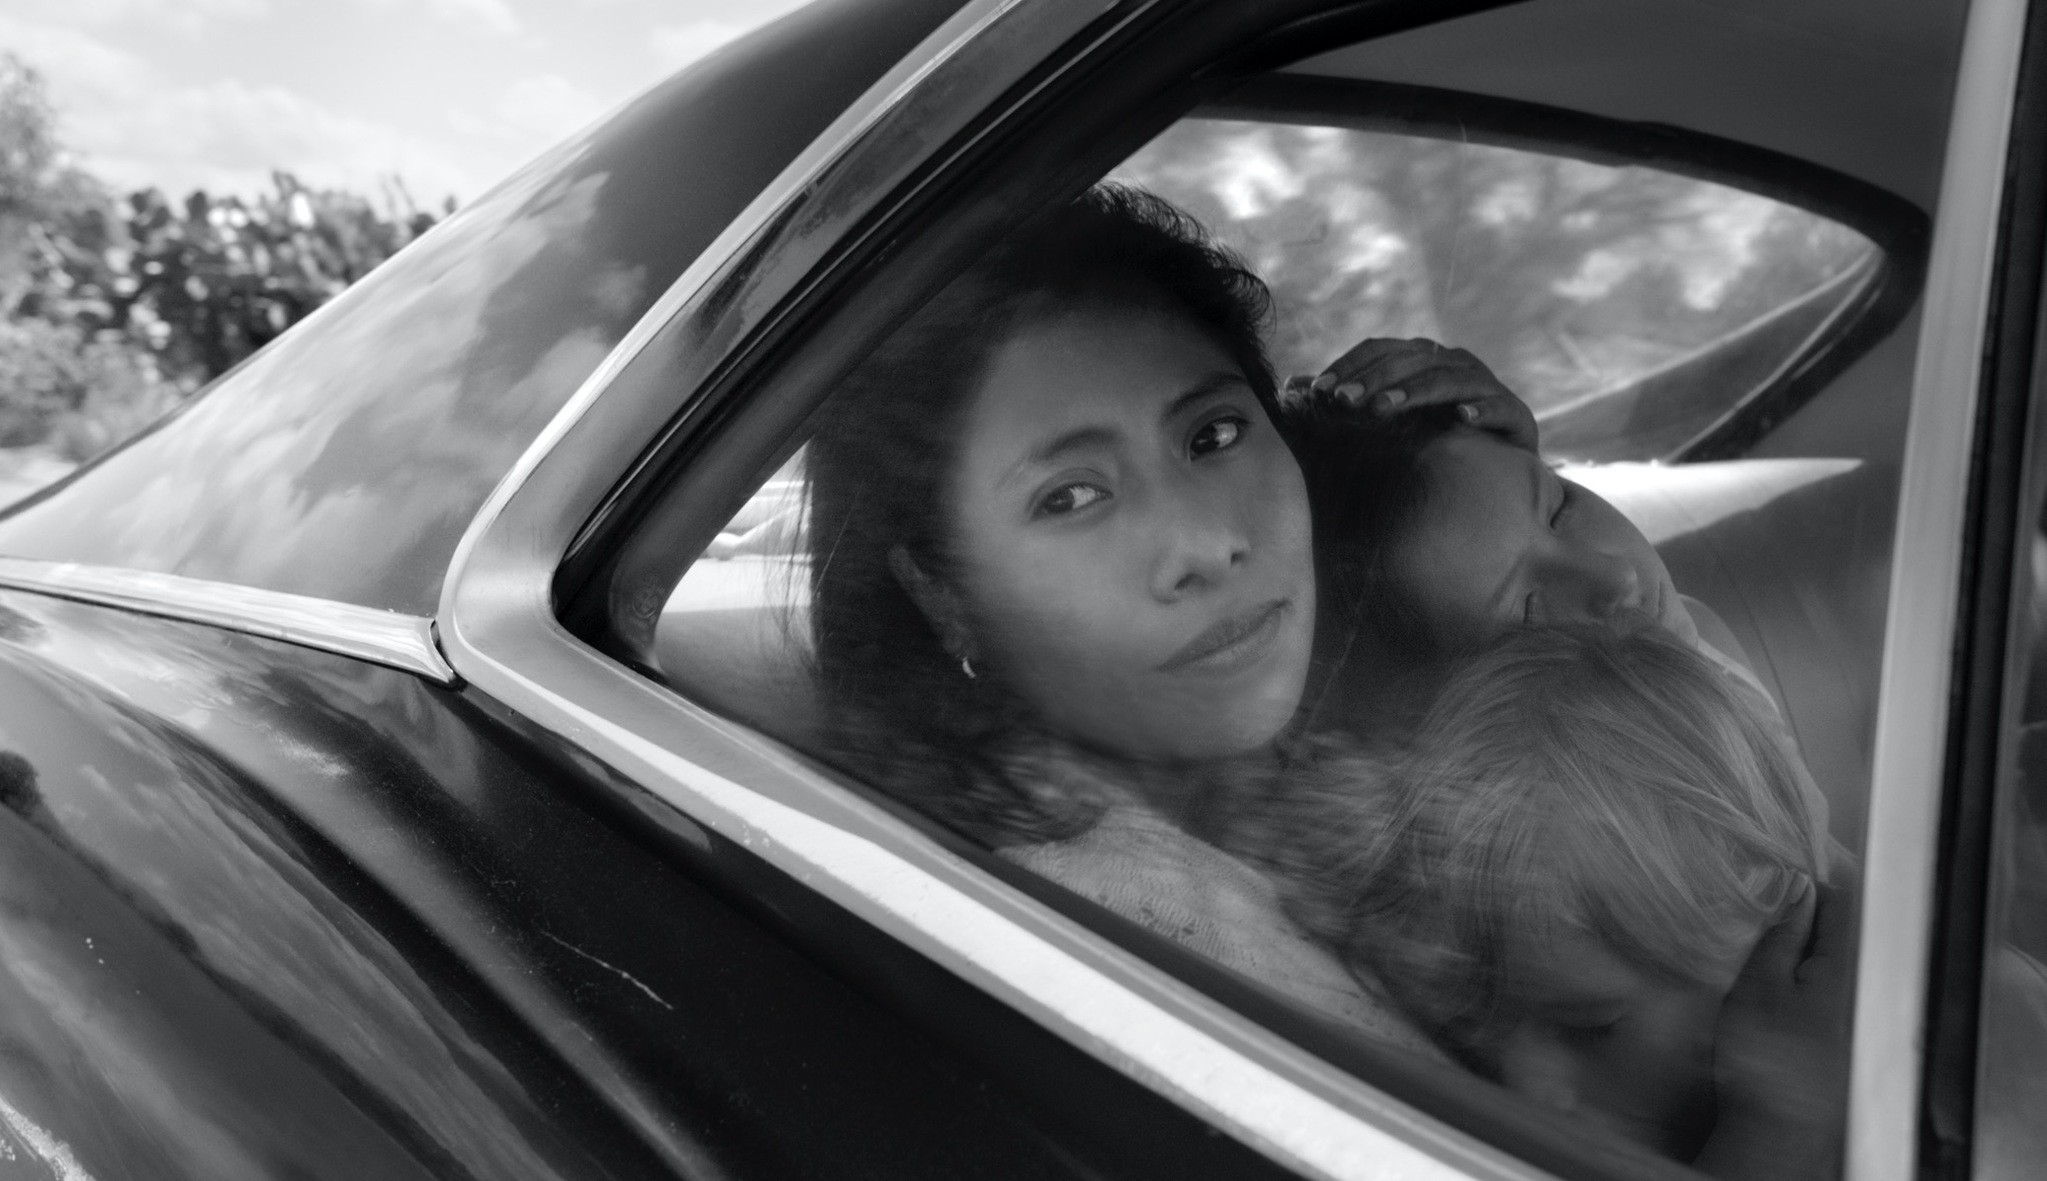 This image released by Netflix shows Yalitza Aparicio in a scene from the film ,Roma,, by filmmaker Alfonso Cuaron.